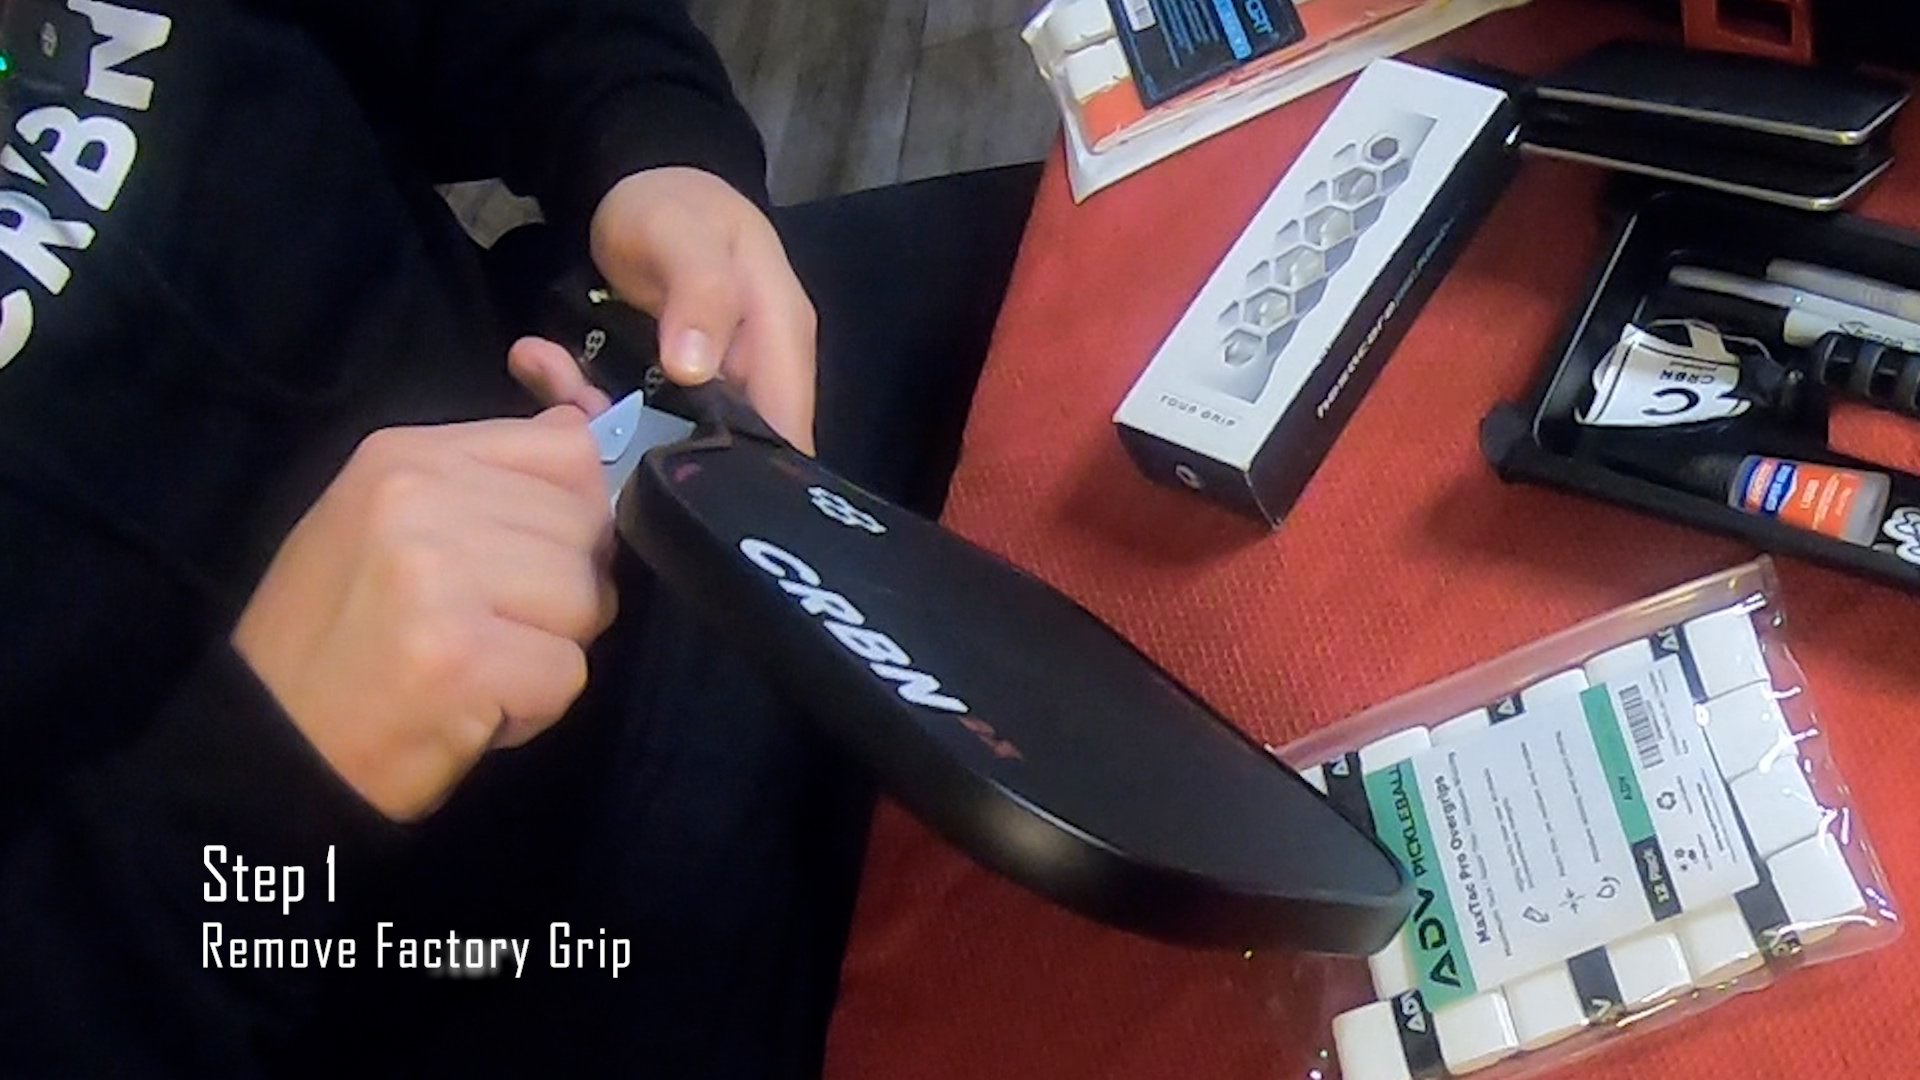 To remove a factory grip, nick the top of the grip with a box cutter or craft knife